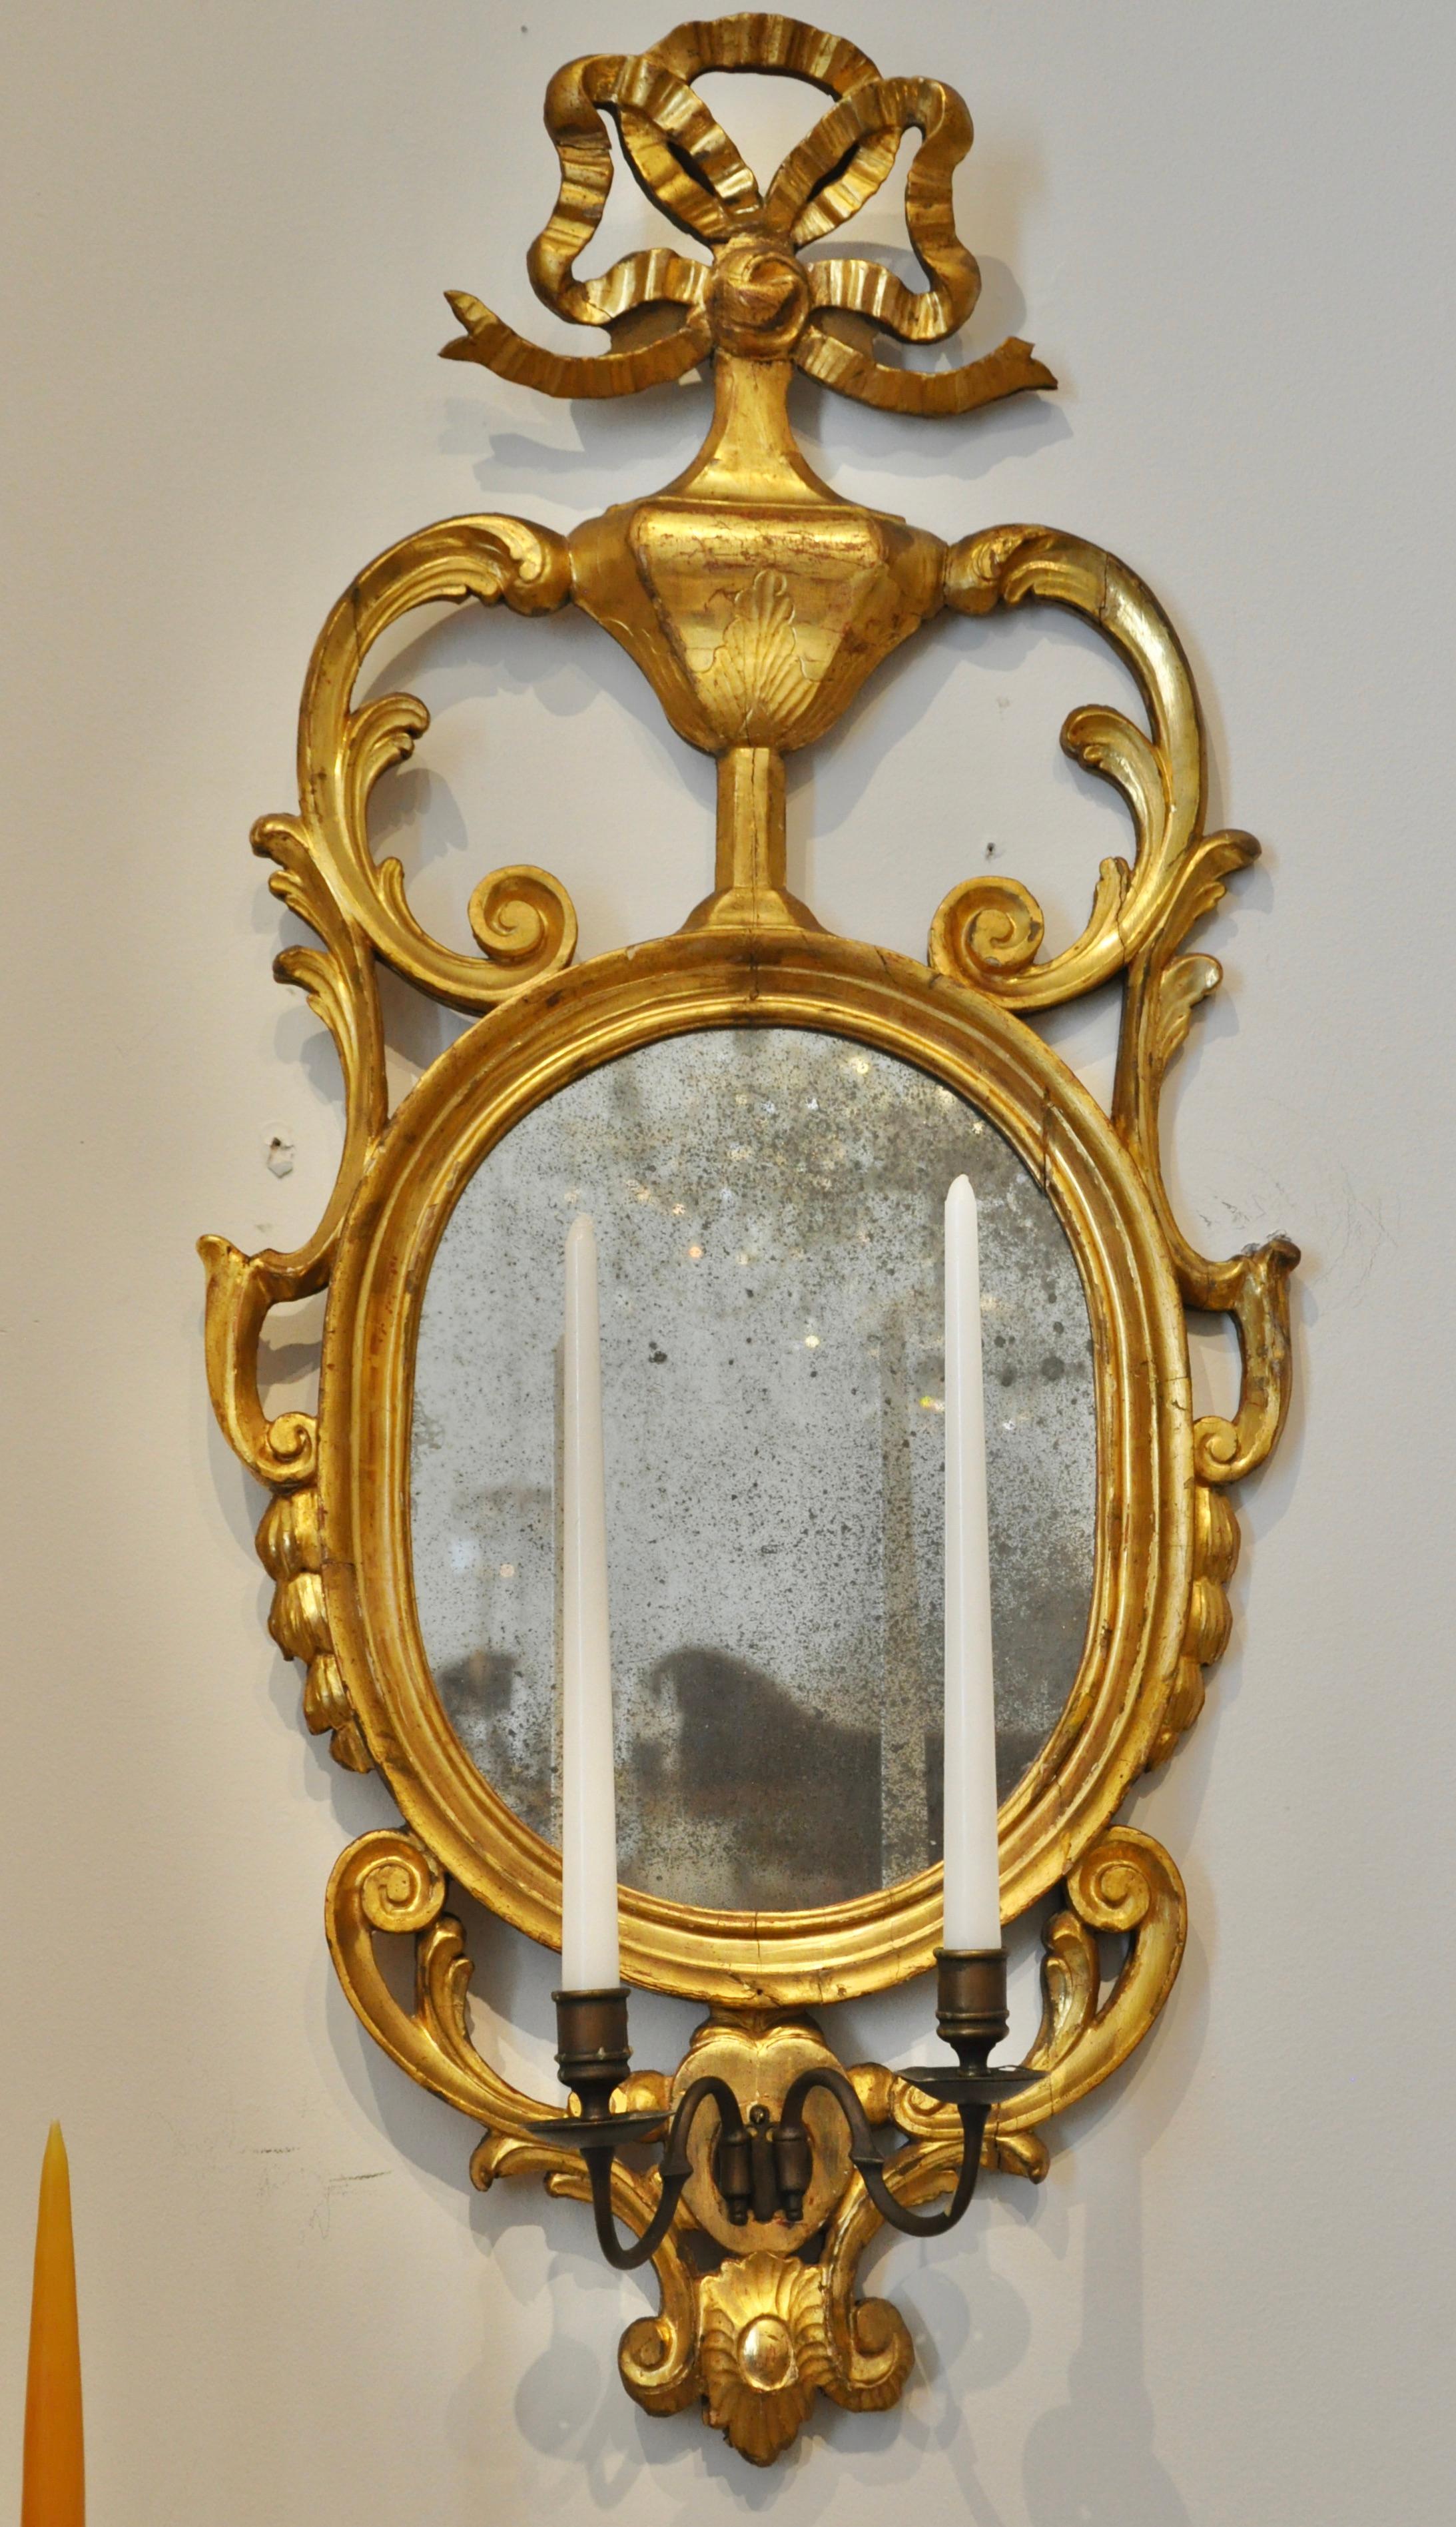 Pair of early 19th century continental sconce mirrors with original early glass and original gilding. Two arm sconces for candles. Great size and wonderful original water gilt carvings. Neoclassical ribbon top motif. Probably Danish in origin.